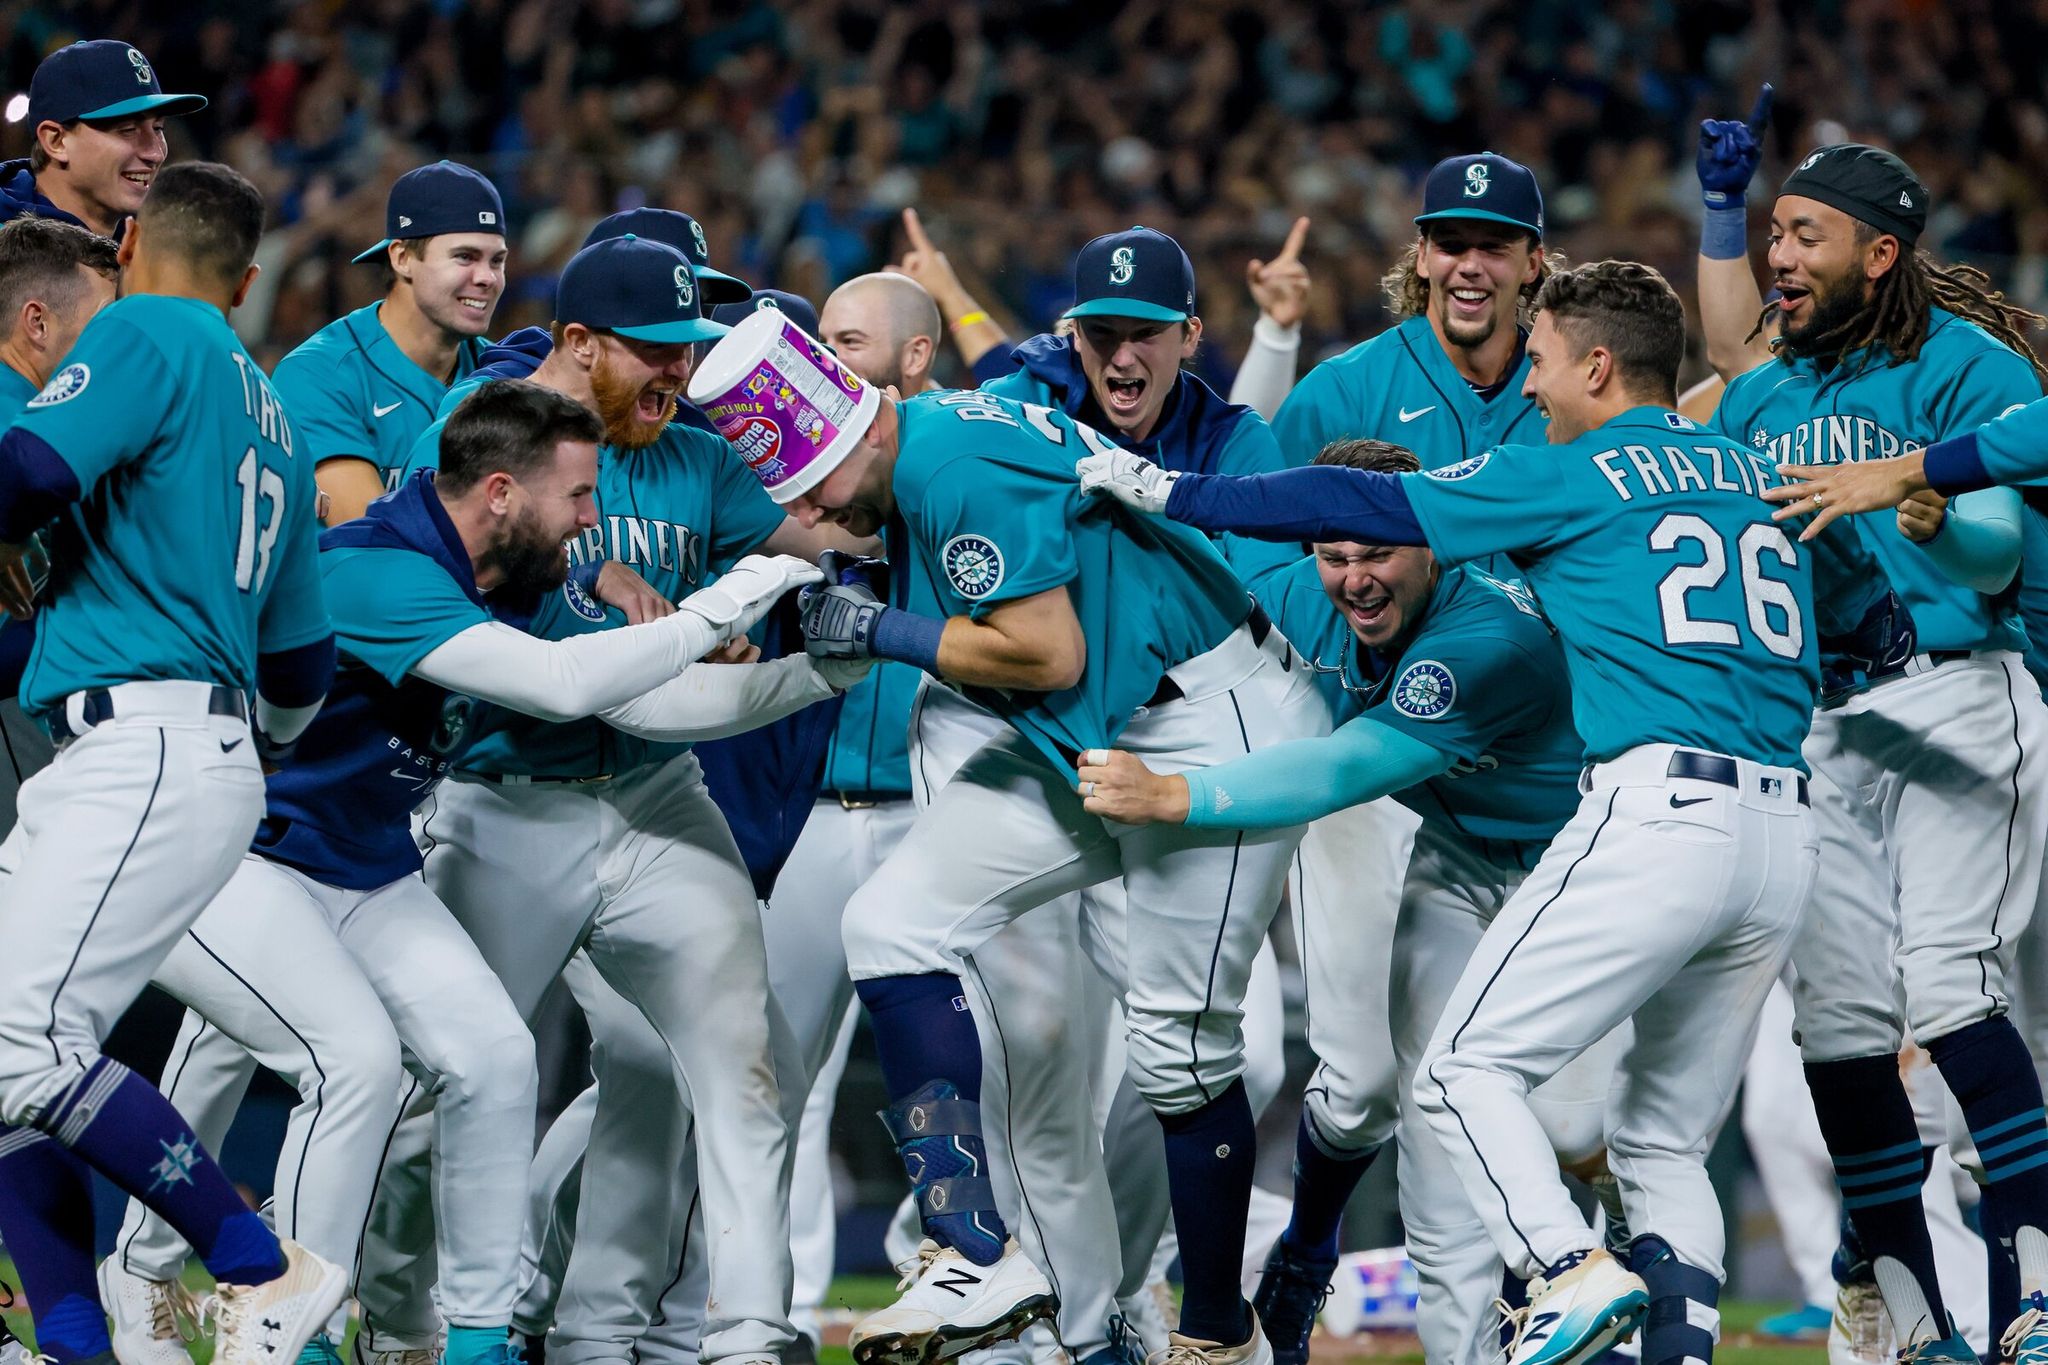 Mariners push through celebration fatigue to top A’s behind Luis